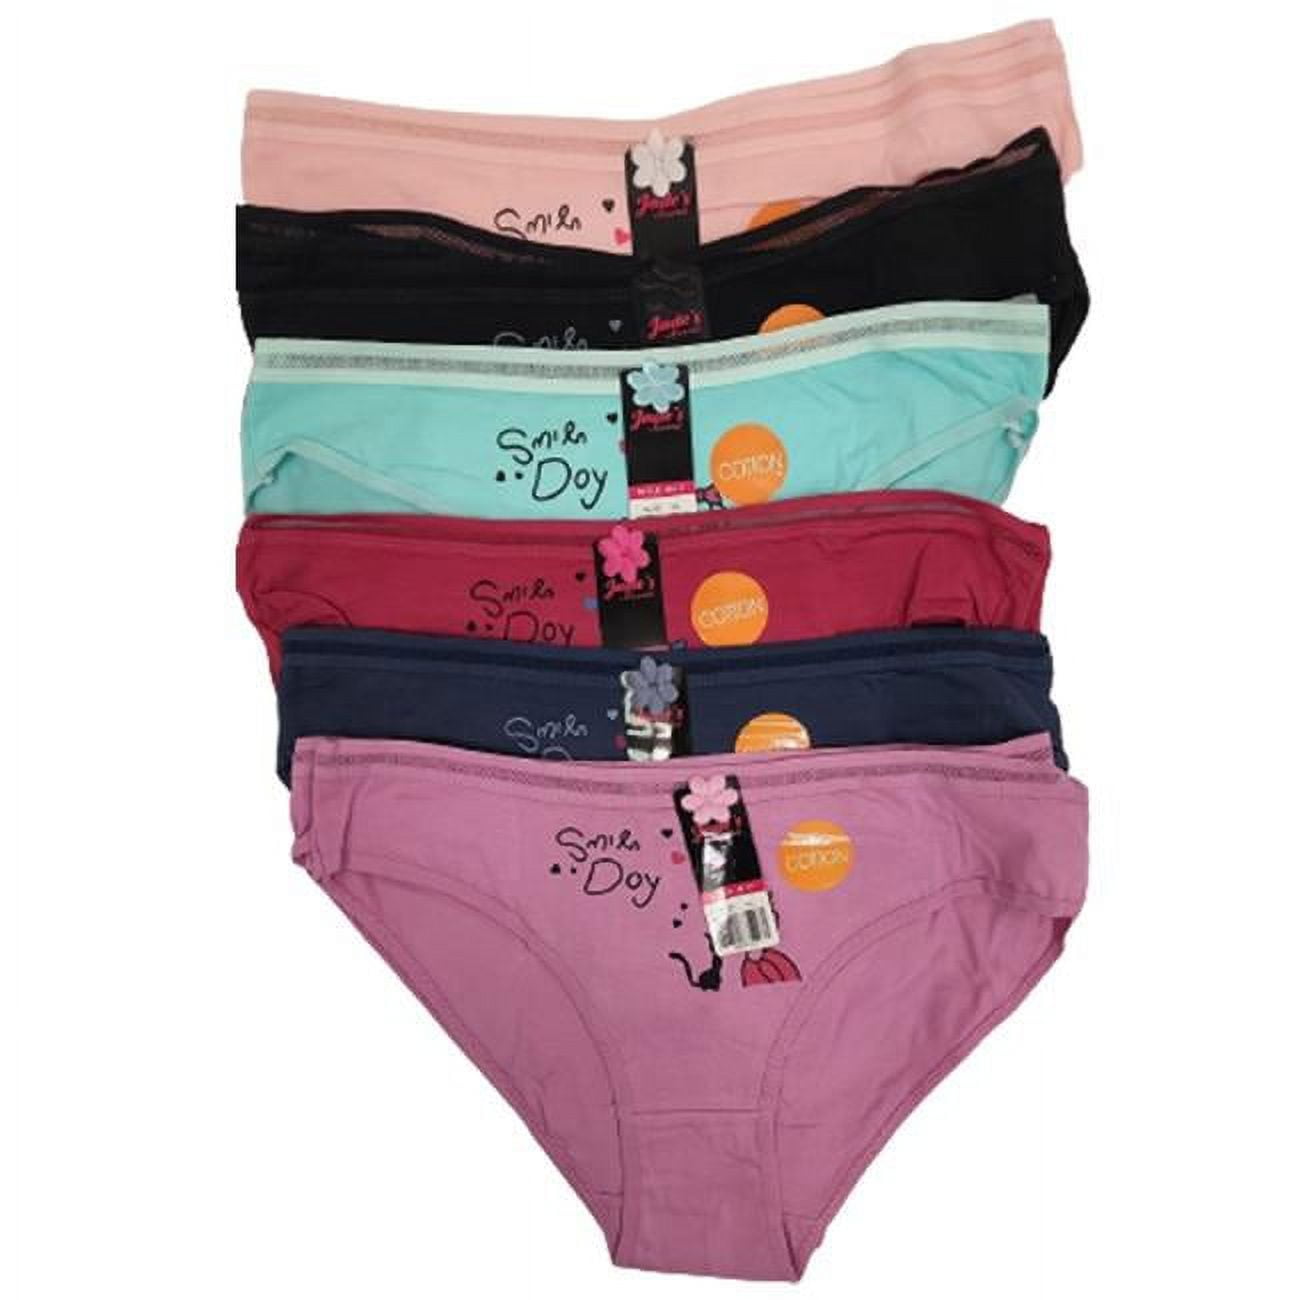 2364451 Womens Classic Panties, Assorted Color - Small-Extra Large - 72 Pair -  DDI